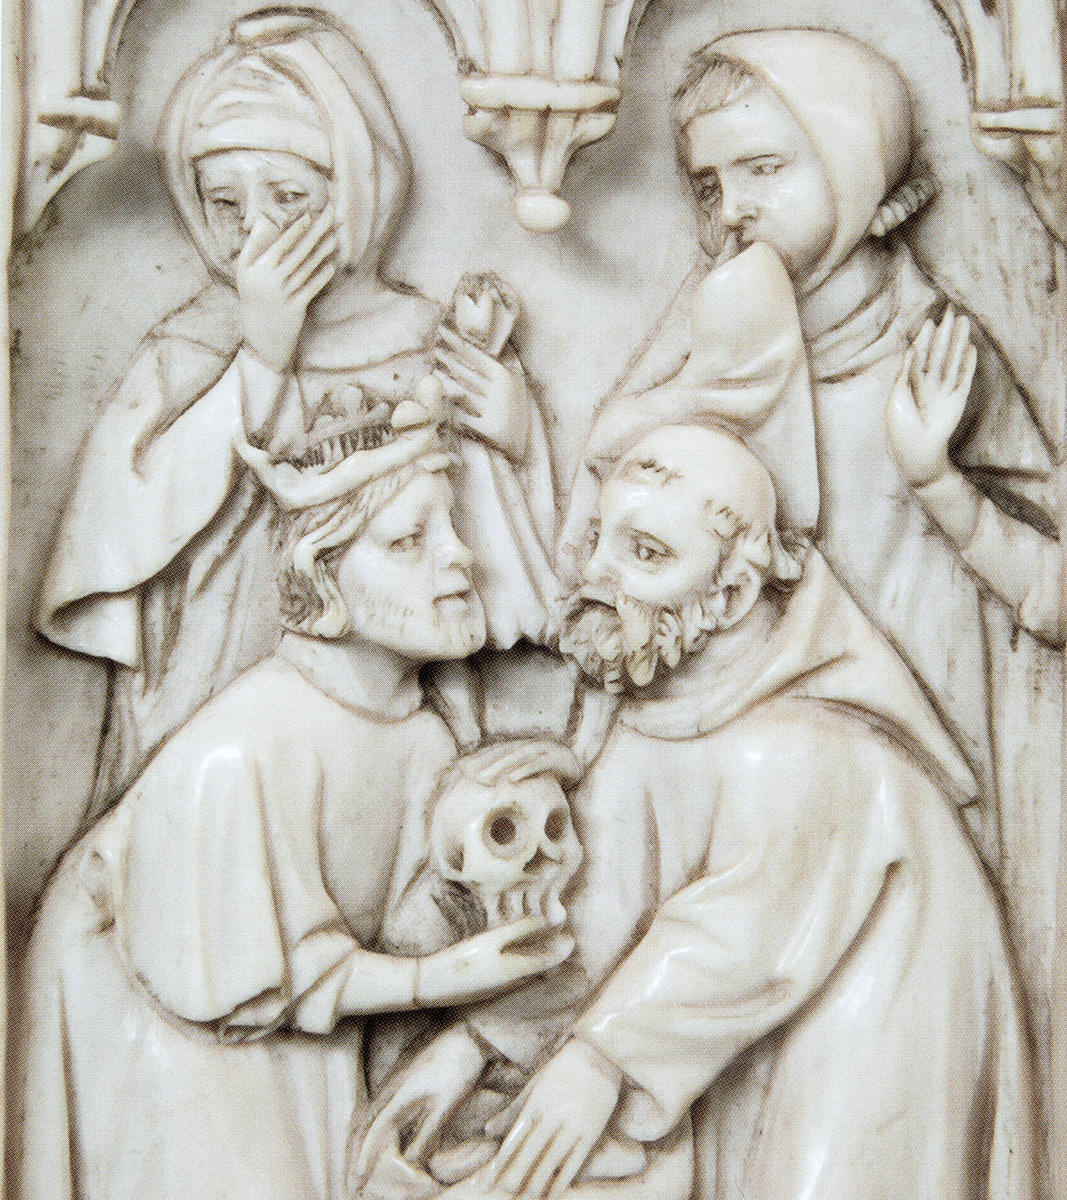 Detail of ivory panel containing crowned king holding skull over sack of skulls, held by monk; behind, two men holding their noses, the first with his hand, the second with a cloth.